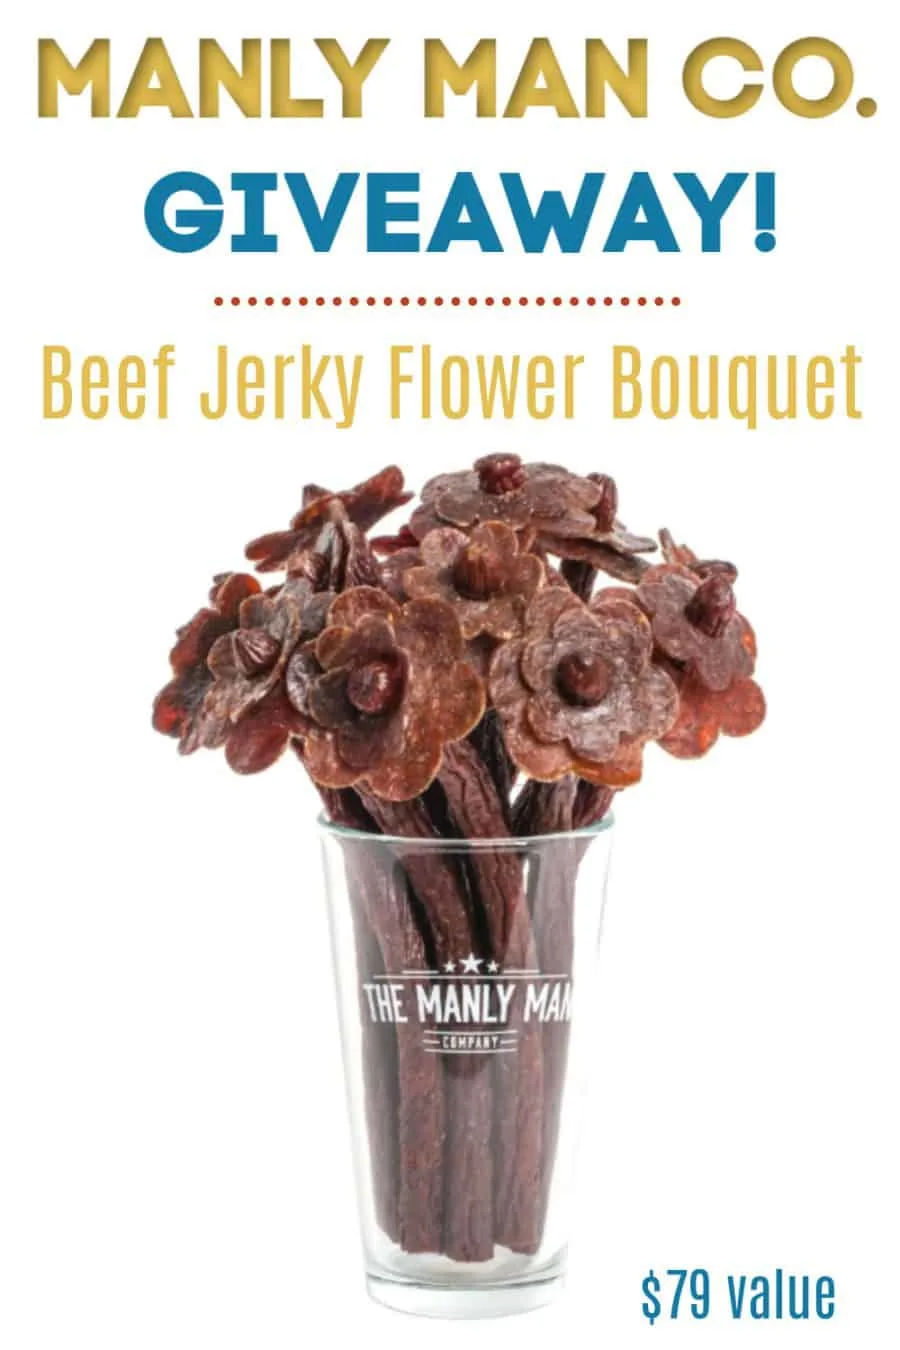 Manly Man Co. Beef Jerky Floral Bouquet Giveaway